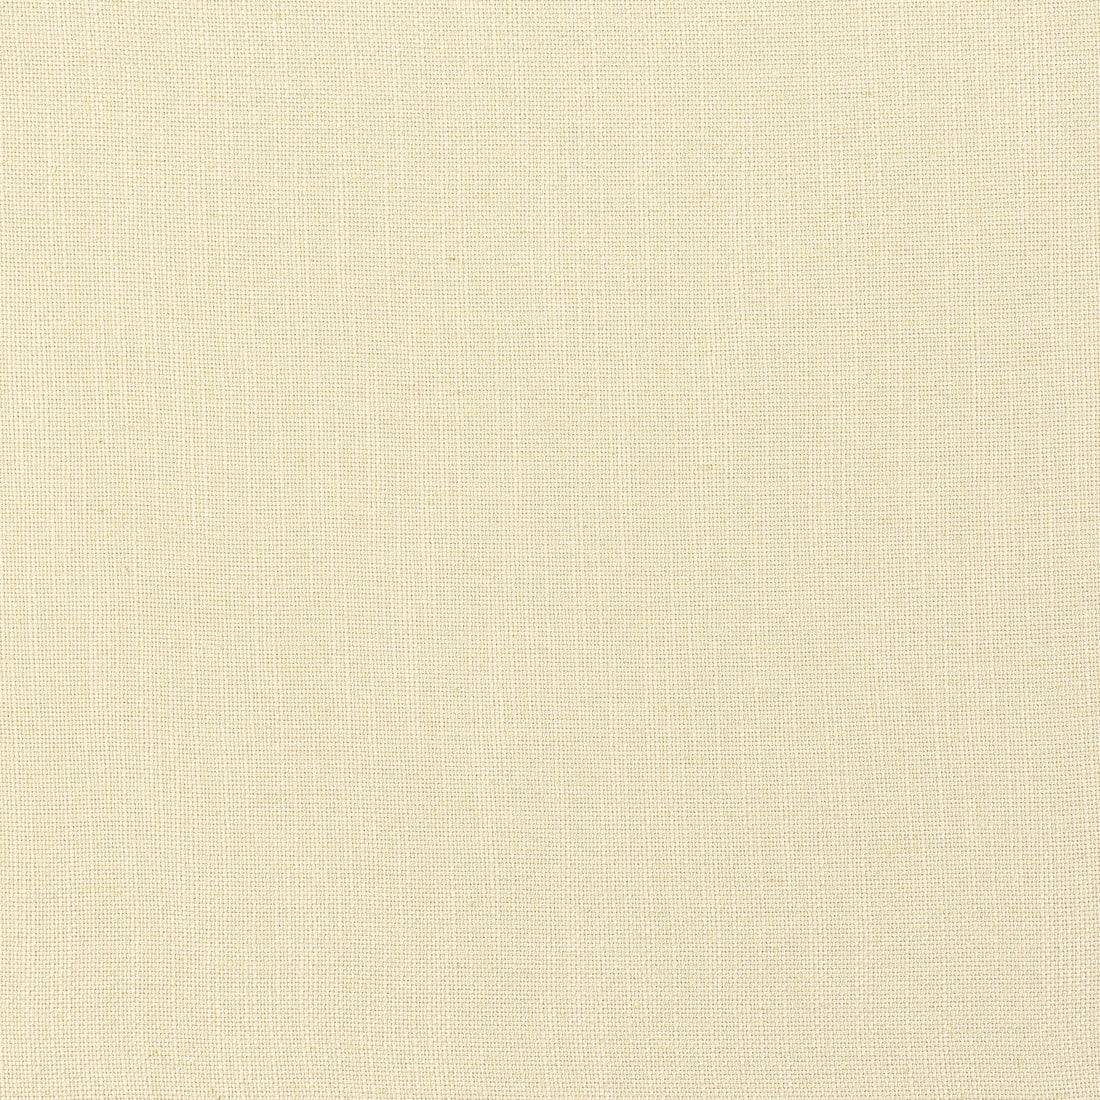 Palisade Linen fabric in cashmere color - pattern number FWW7629 - by Thibaut in the Palisades collection